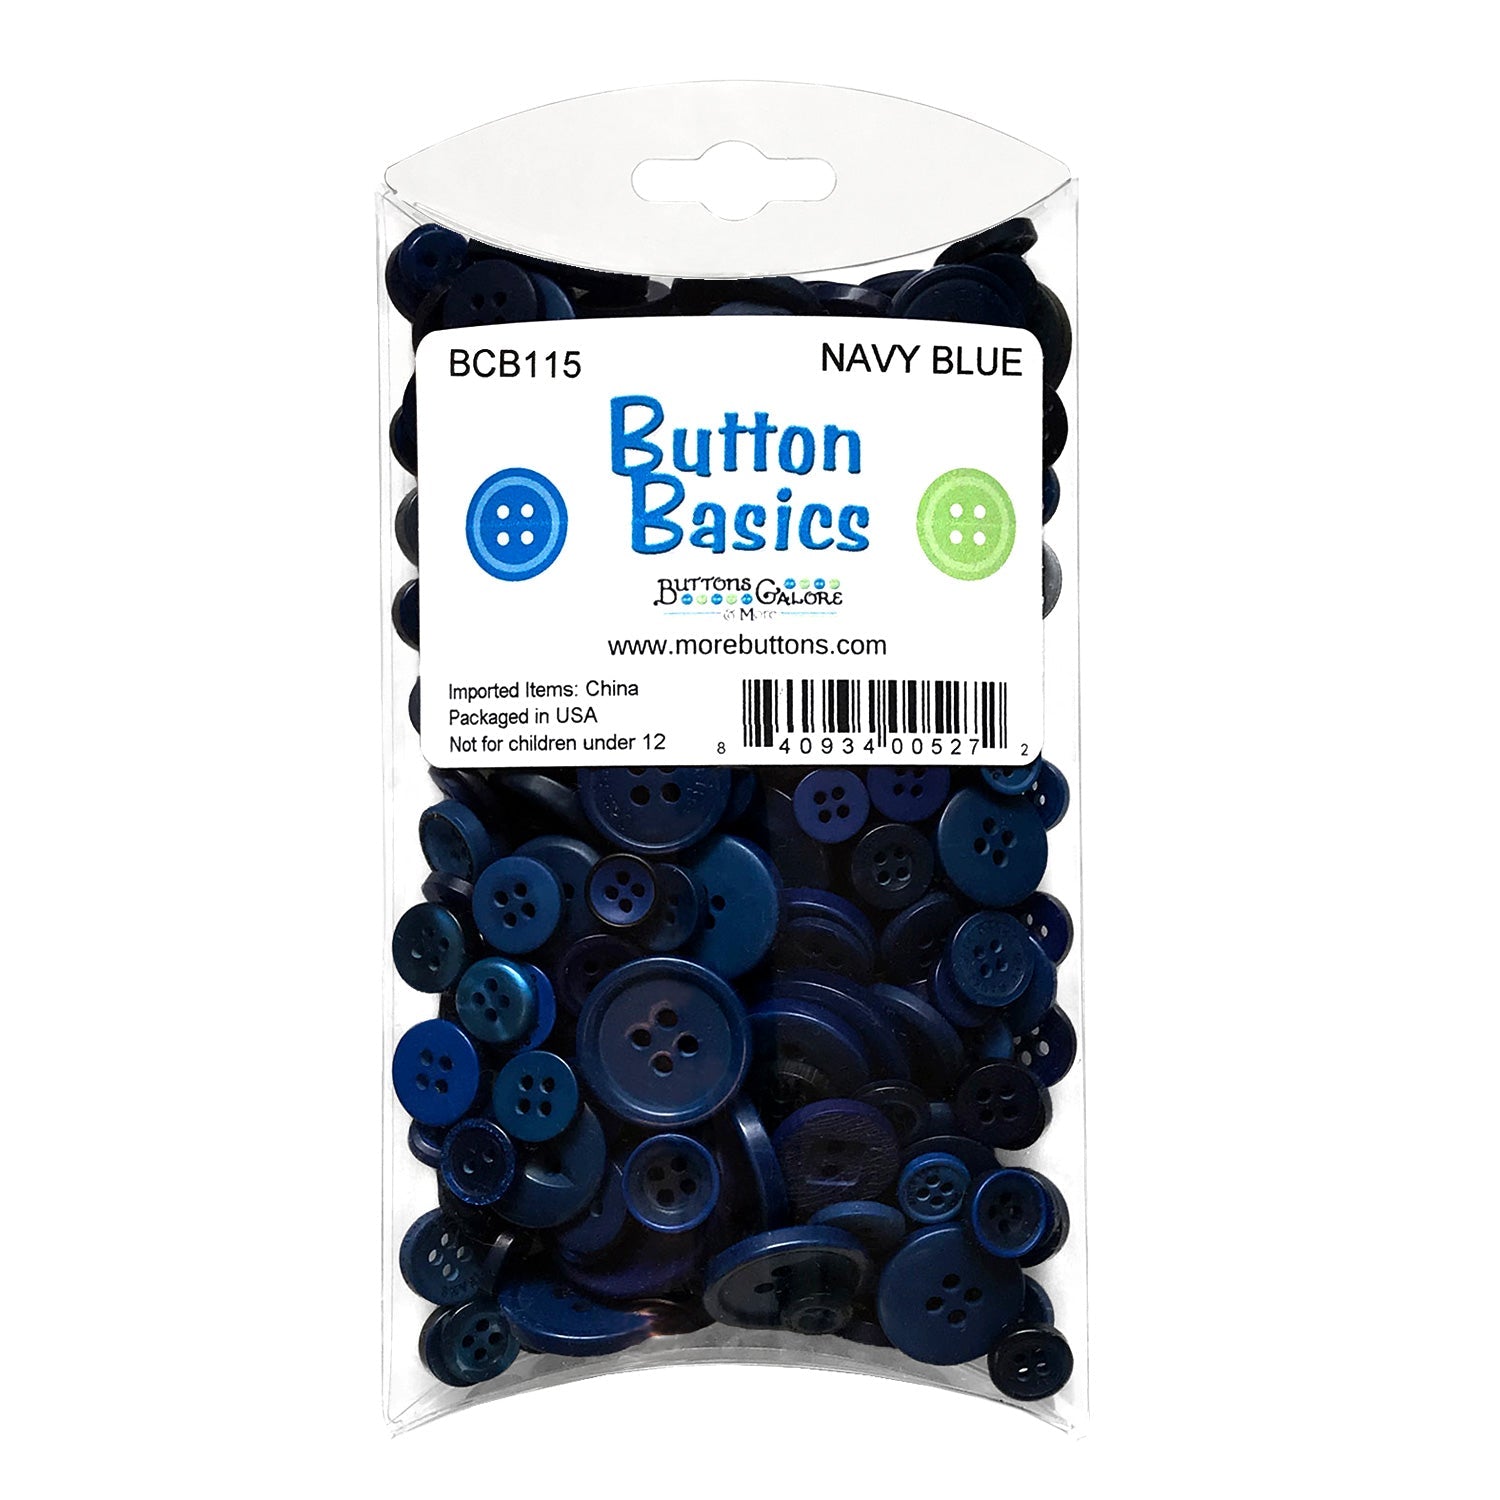 Dark Blue Buttons for Crafts Sewing Scrapbooks and Quilts. Assorted sizes  including small dark blue buttons